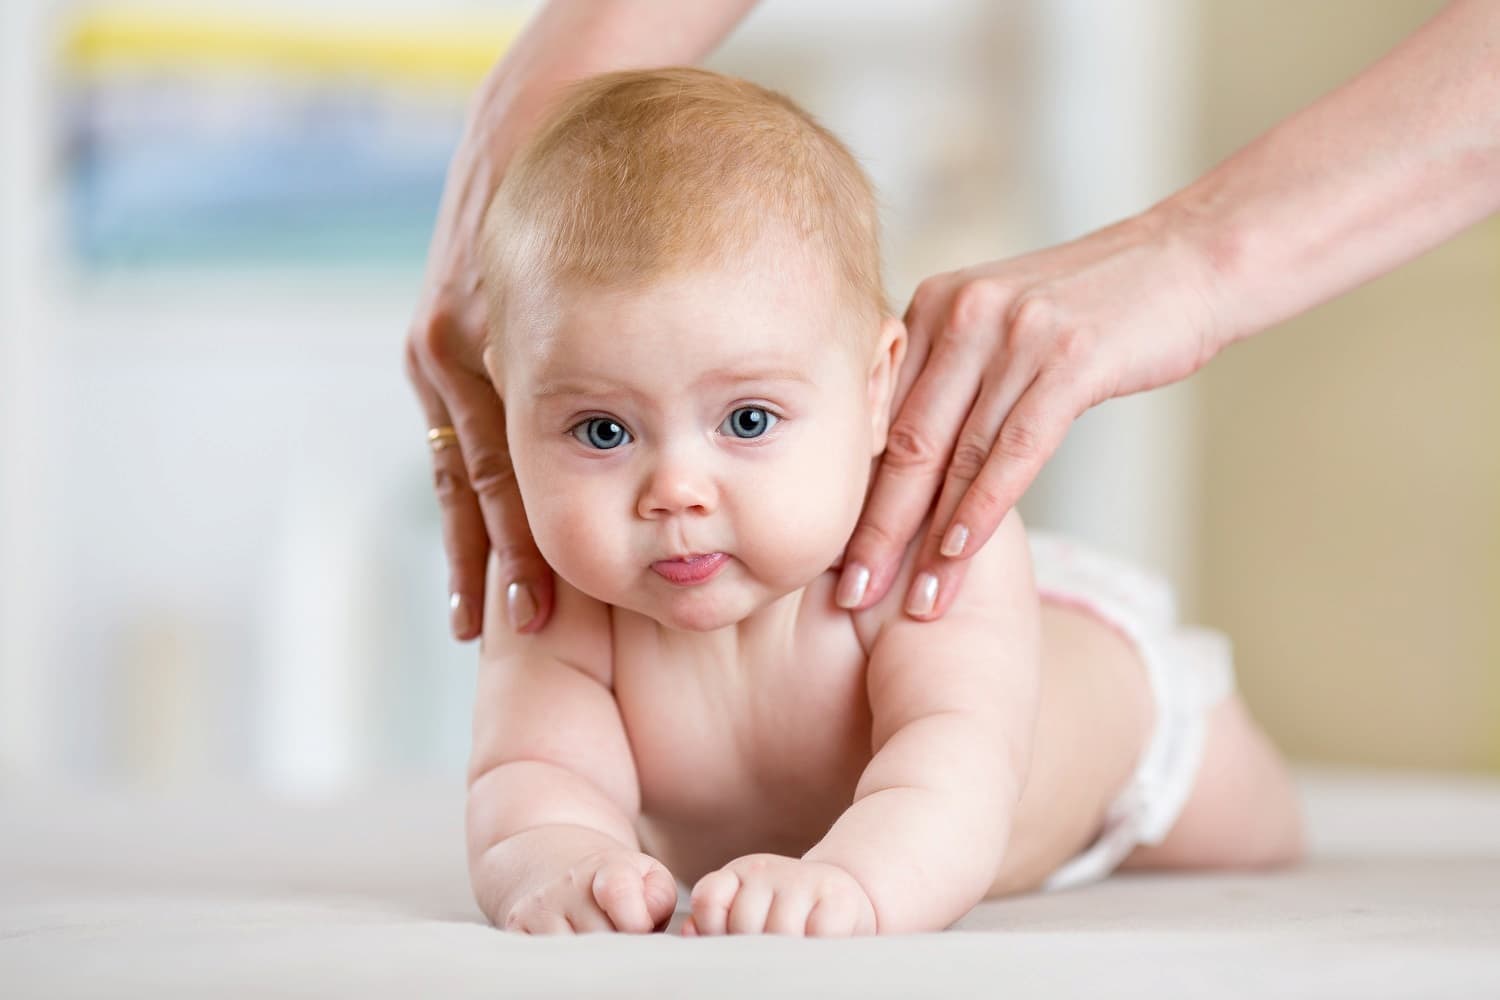 What is infant/baby massage?